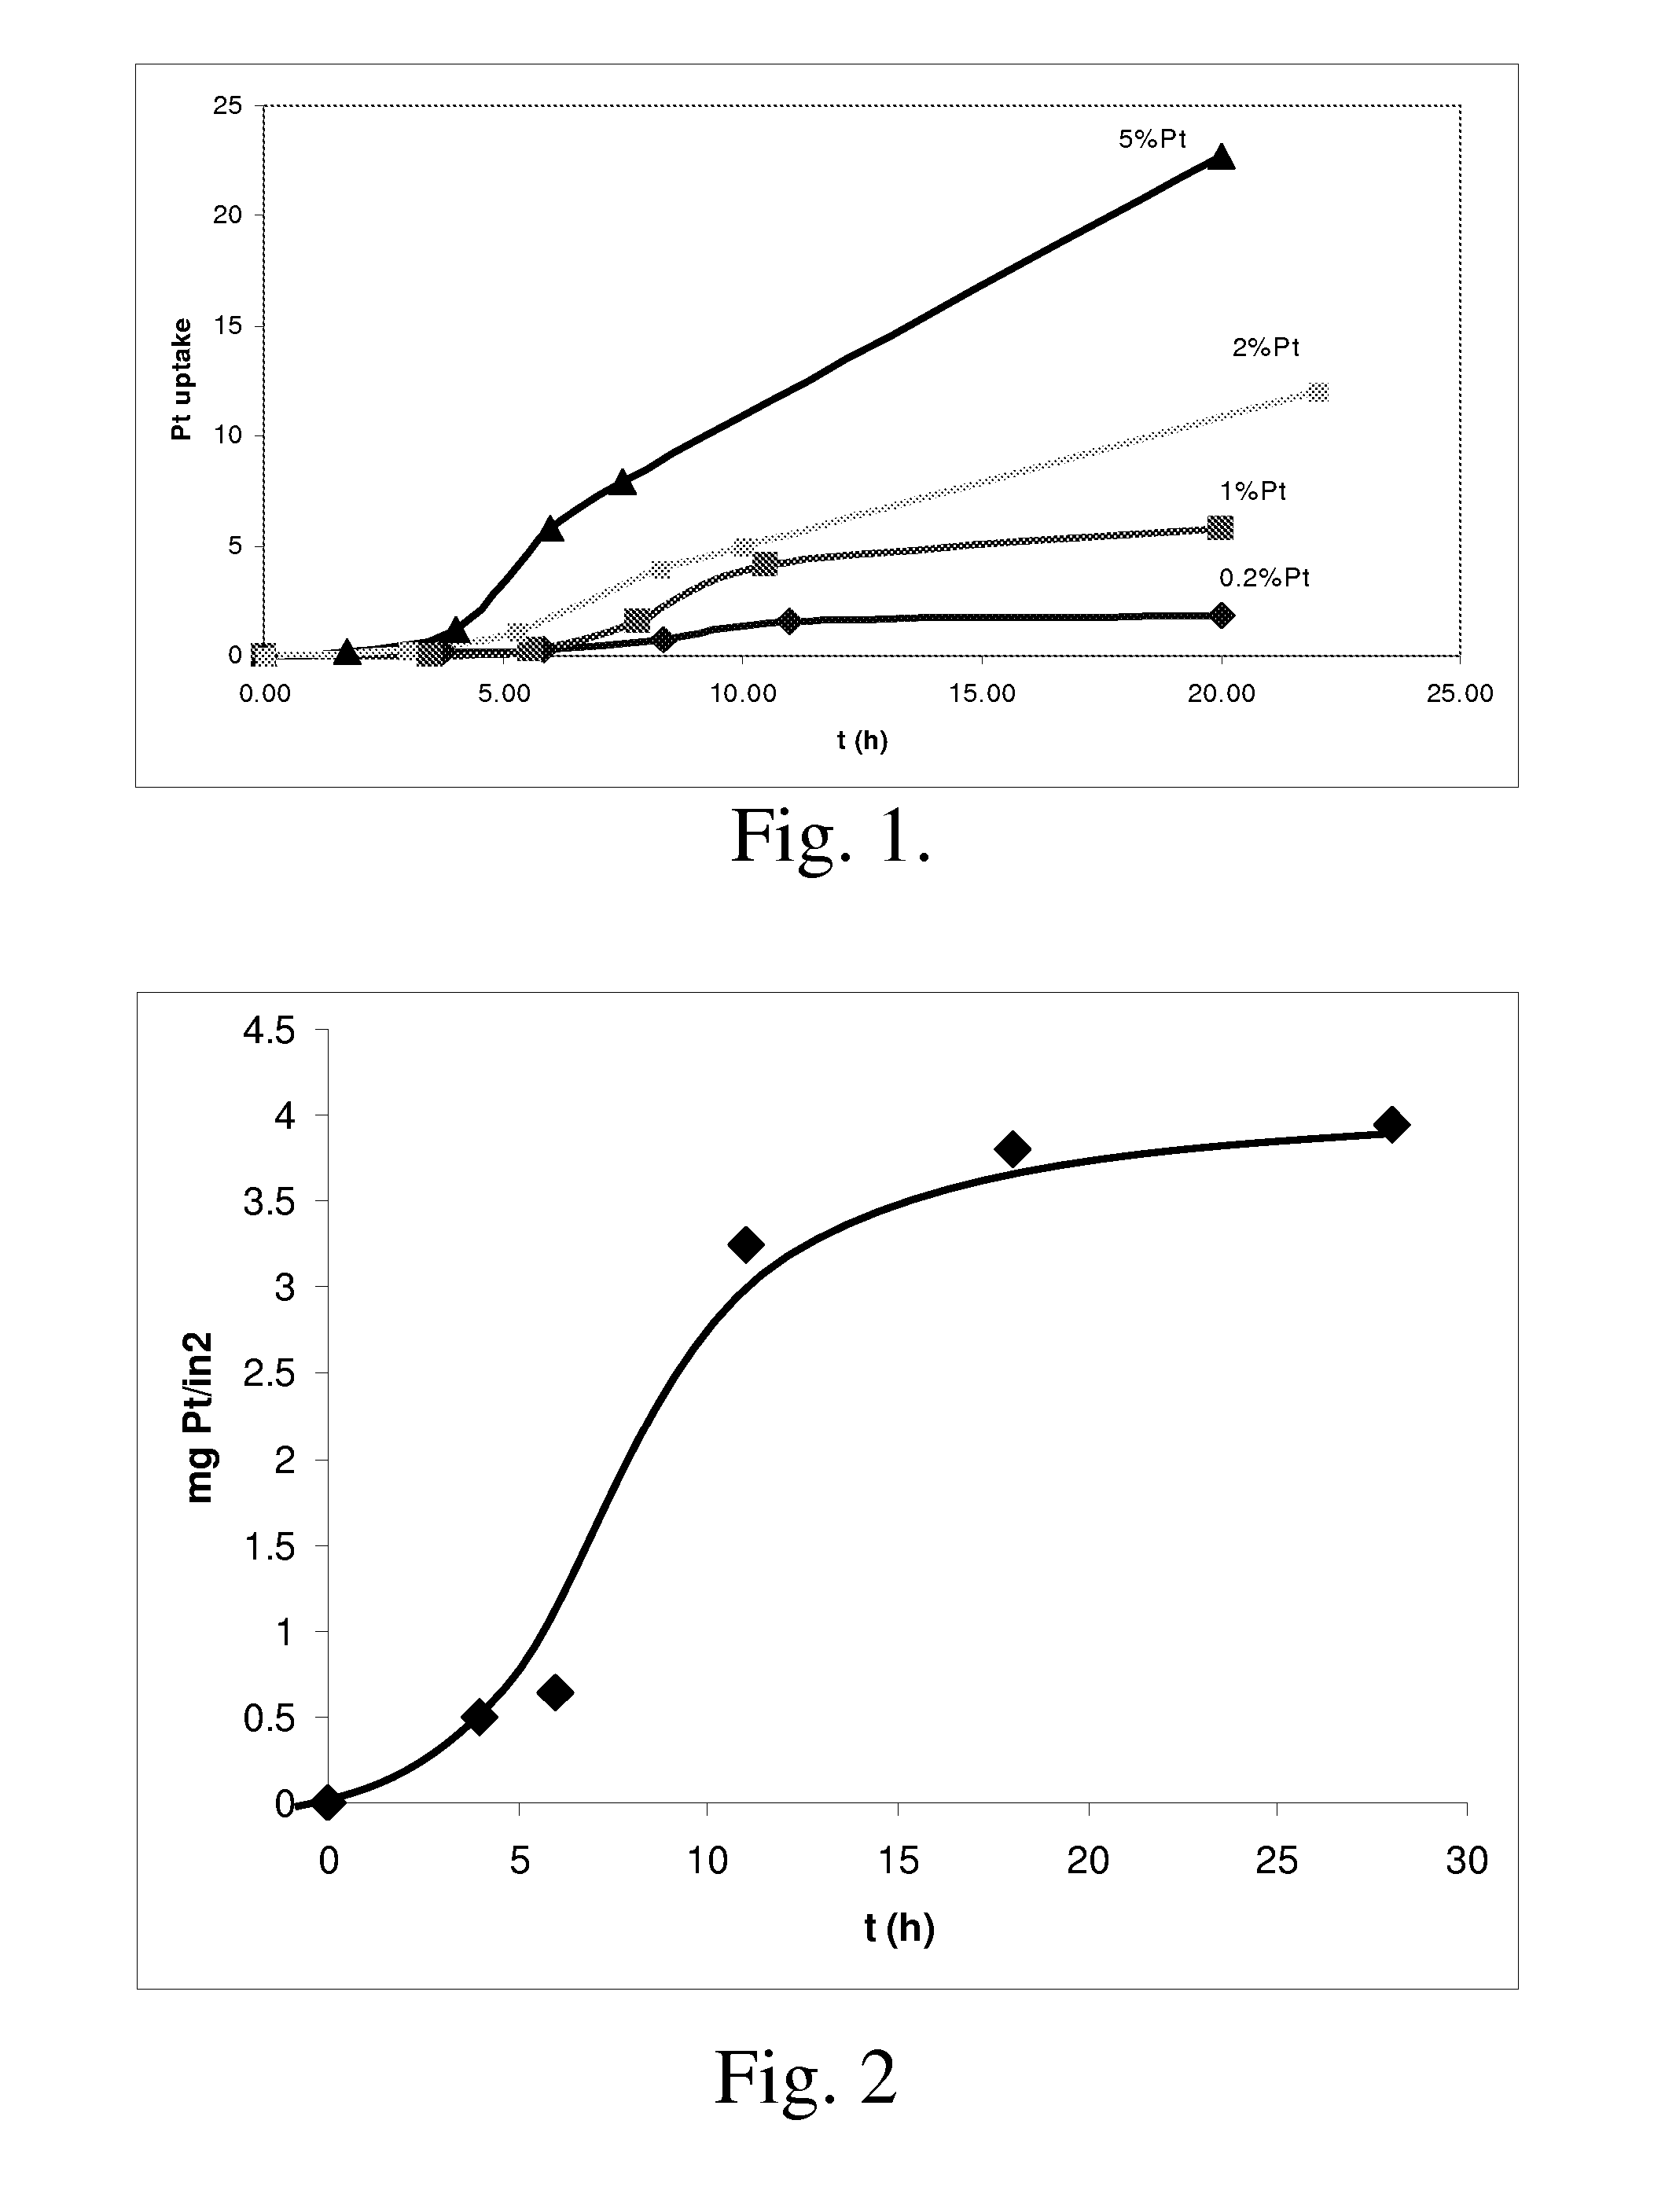 Microchannel apparatus comprising a platinum aluminide layer and chemical processes using the apparatus